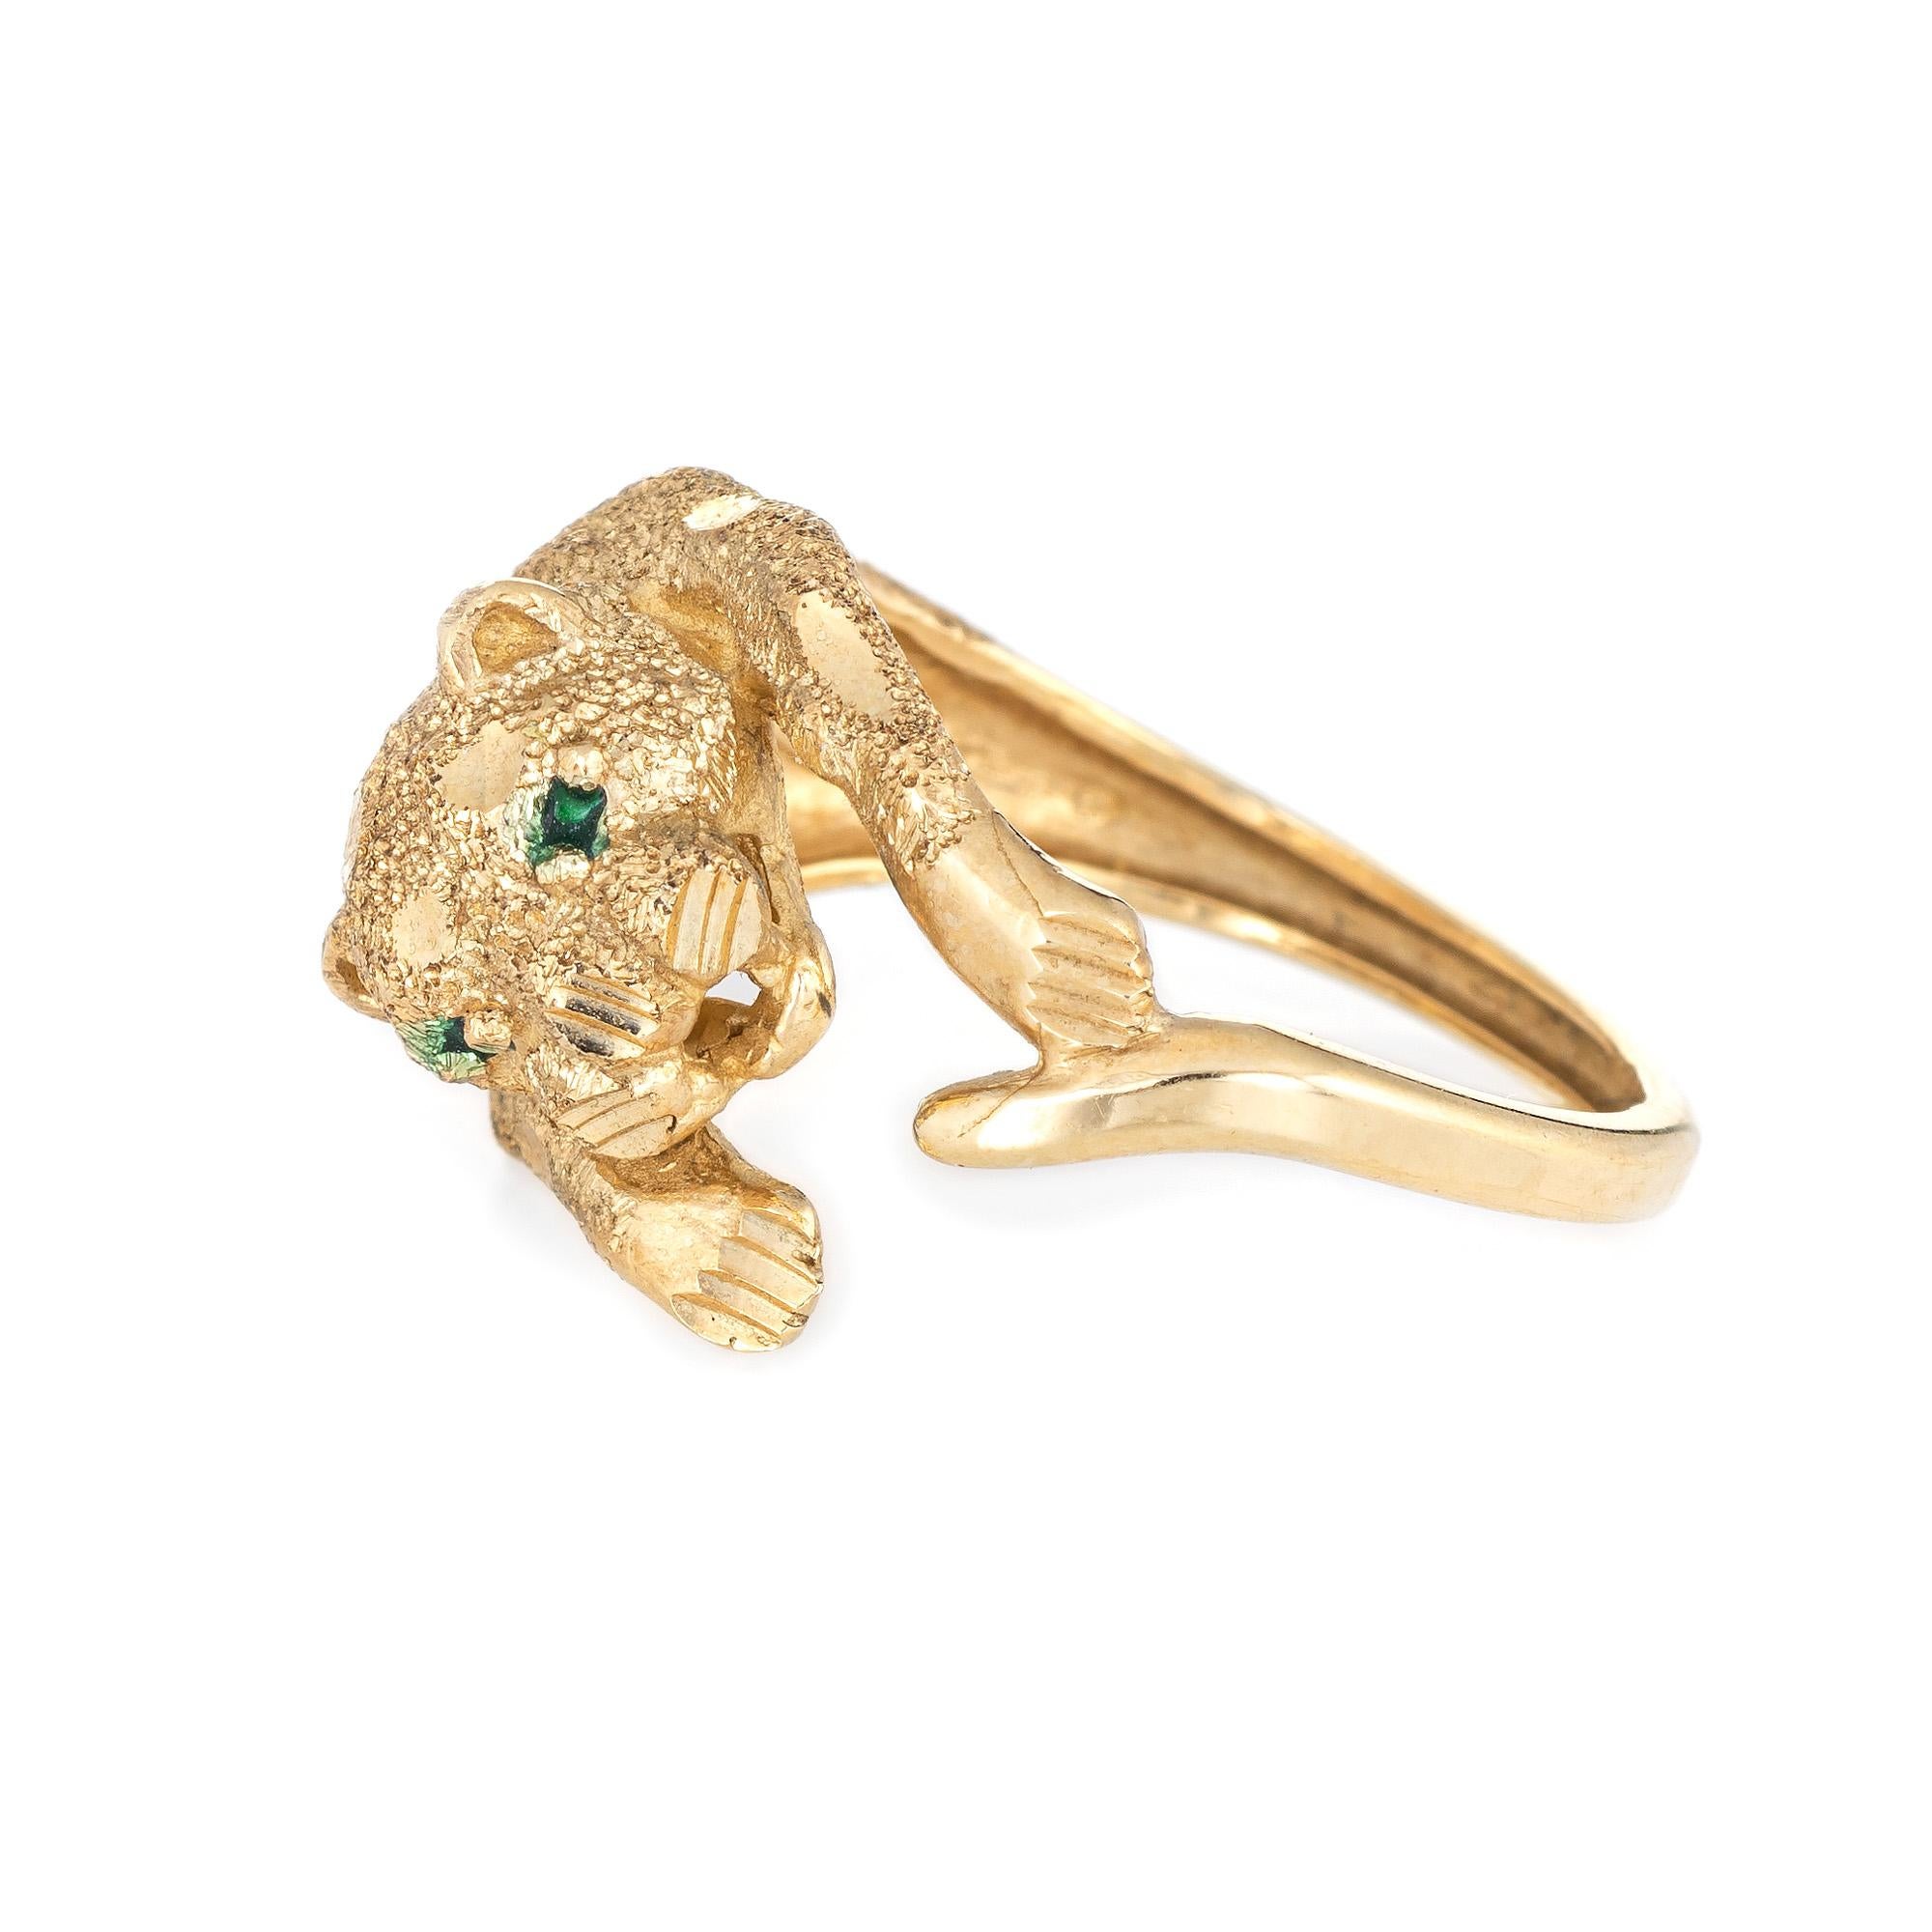 Stylish vintage leopard cat ring crafted in 14 karat yellow gold. 

The leopard features a textured design with scalloped 'spots' designed to catch light. The low rise ring (6.5mm - 0.25 inches) sits comfortably on the finger. The ring is impactful